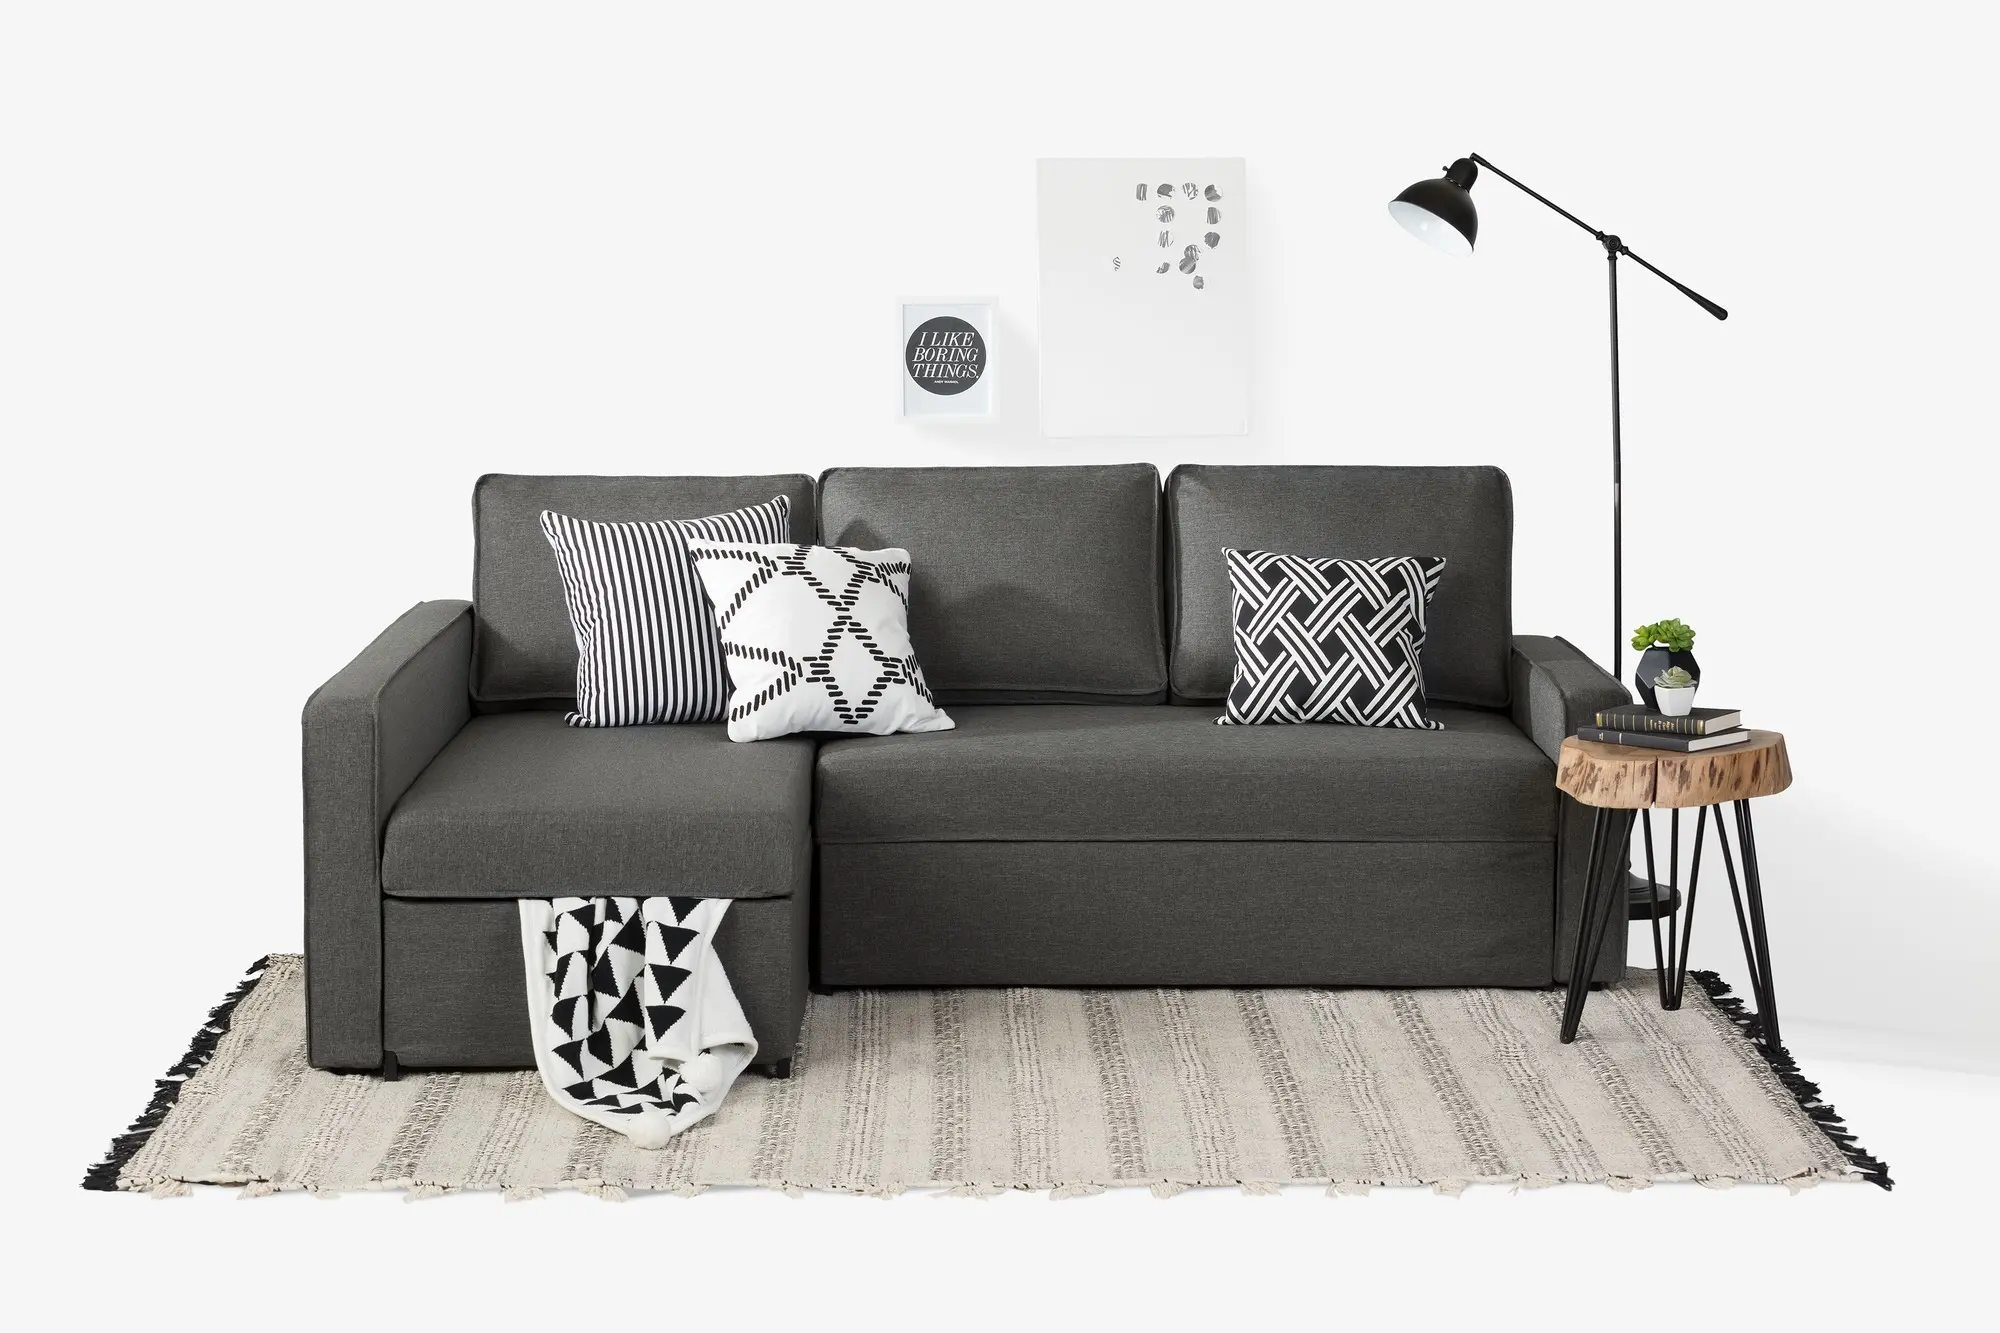 Charcoal Gray Chaise Sofa Bed - Live-it Cozy